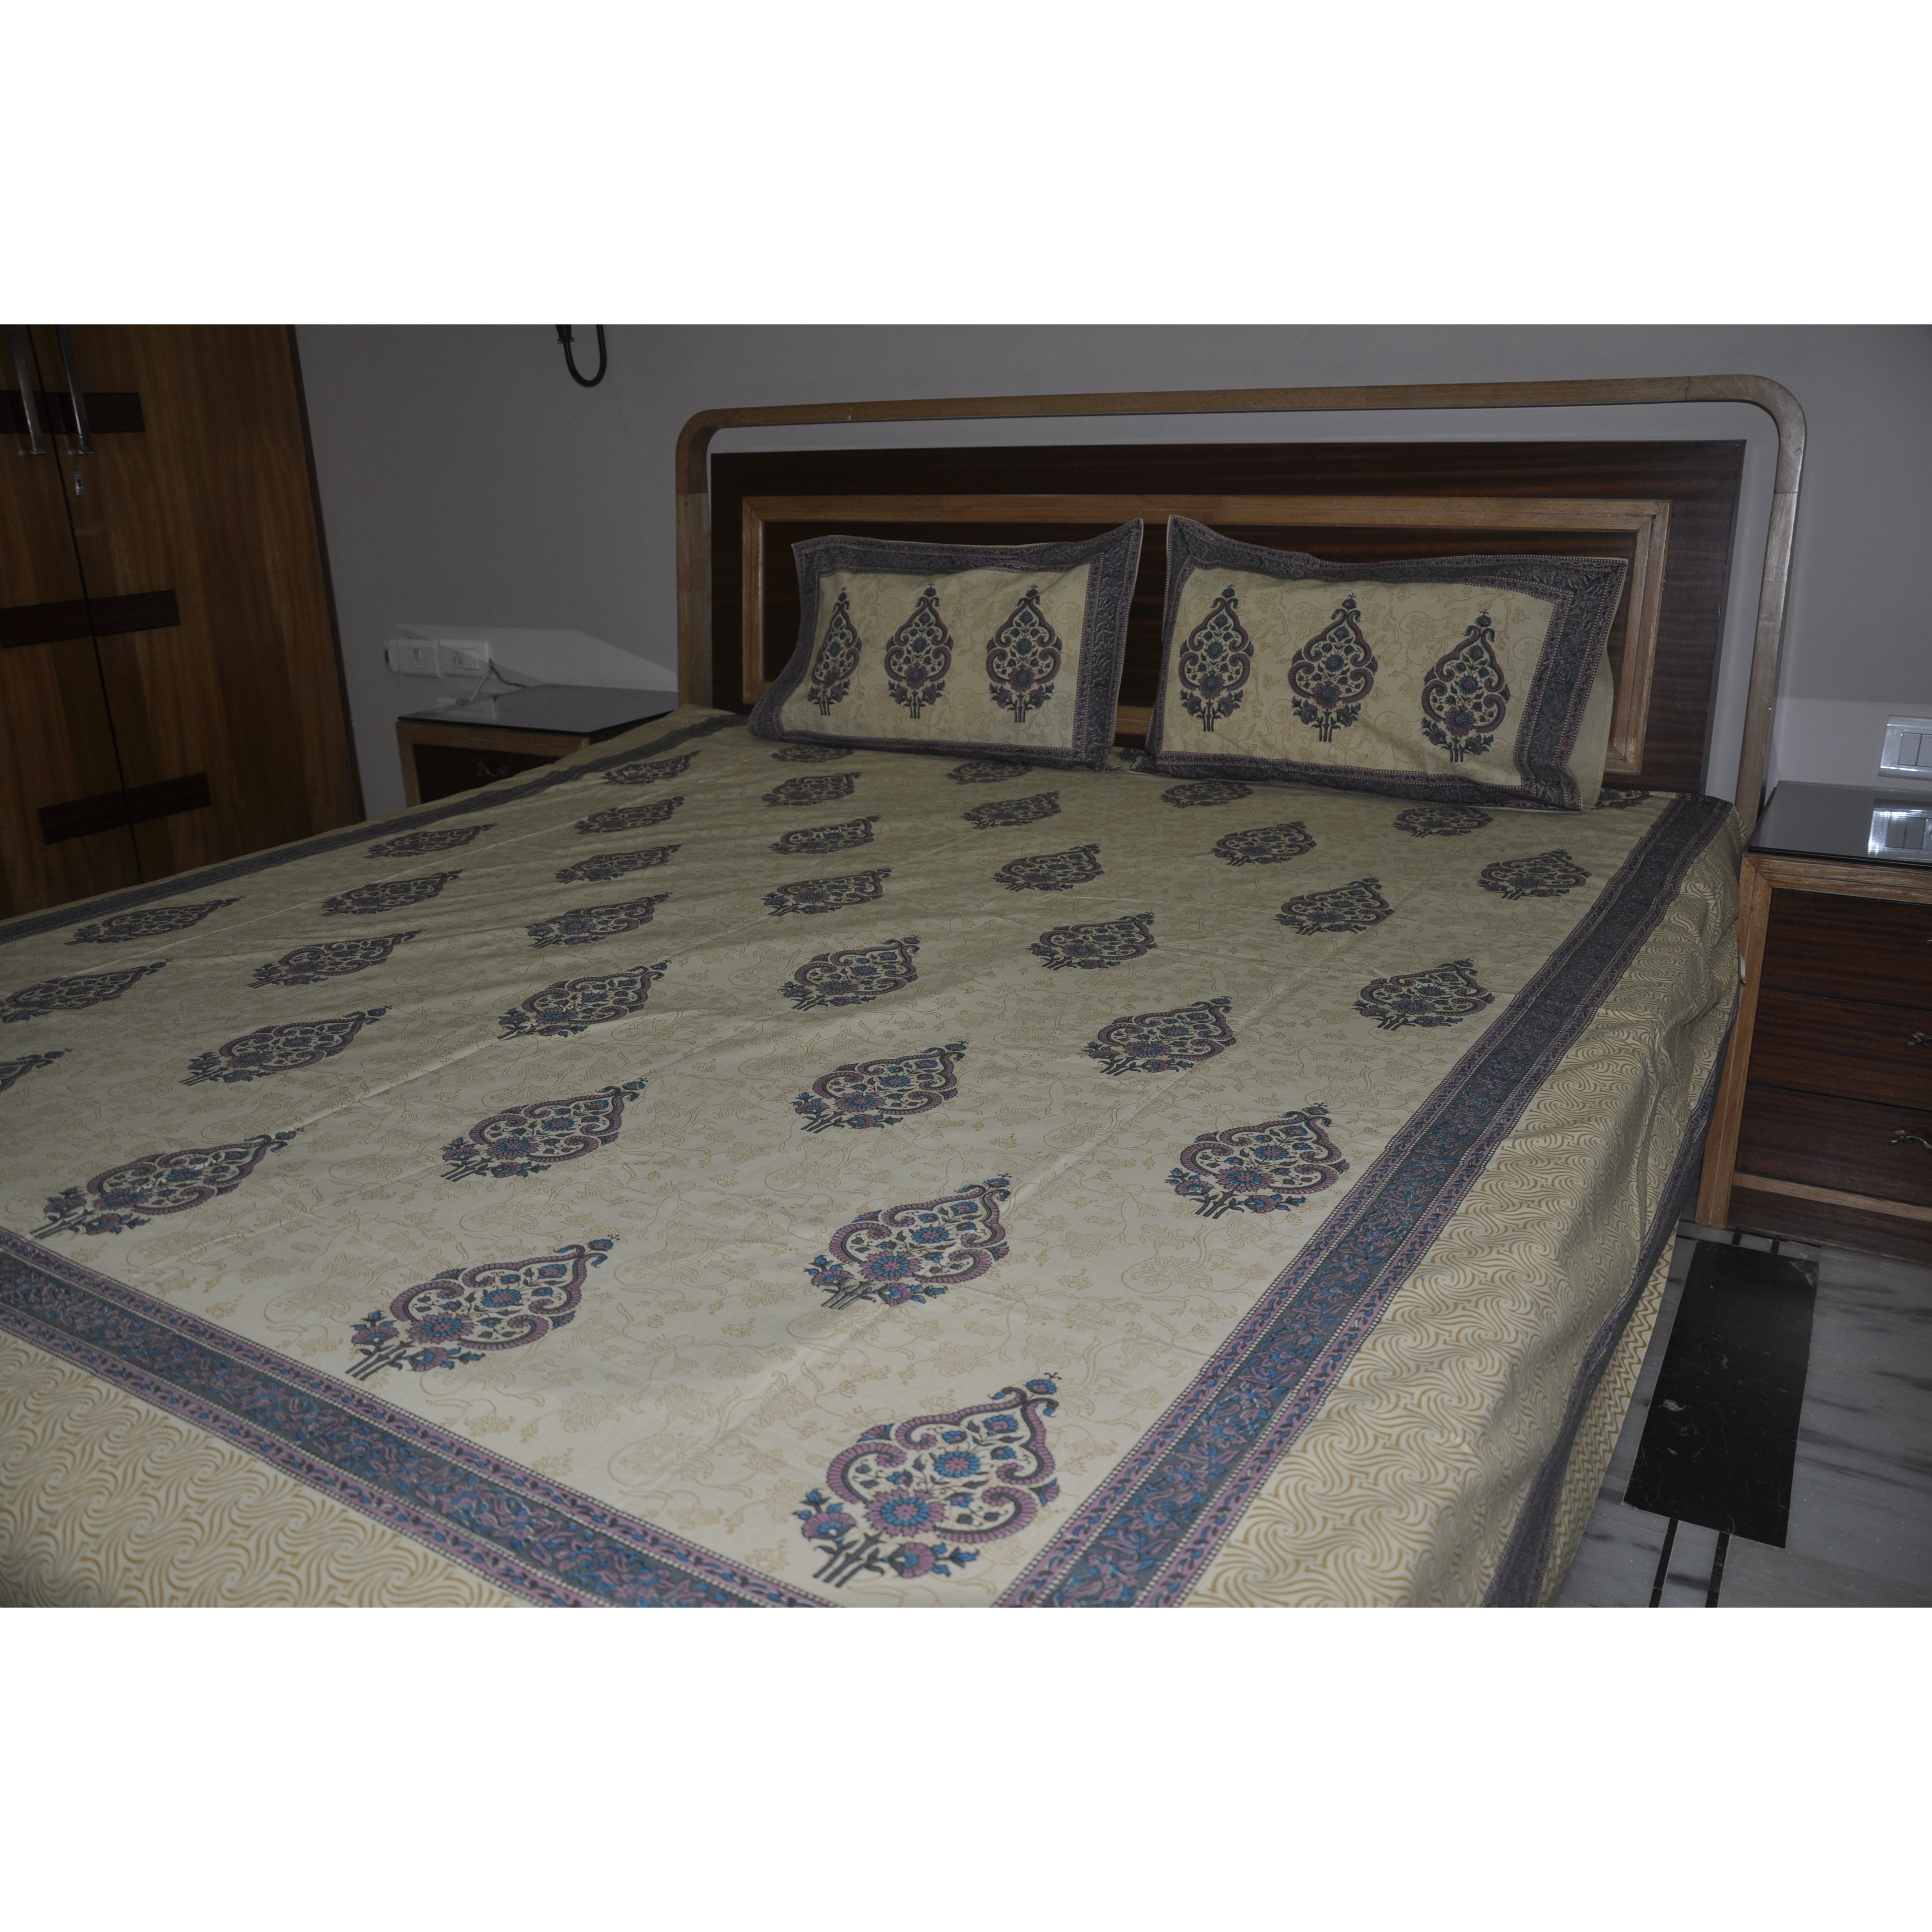 Indian Bedspread Cotton Block Printed Beige House Warming Throw Bed Sheet Set